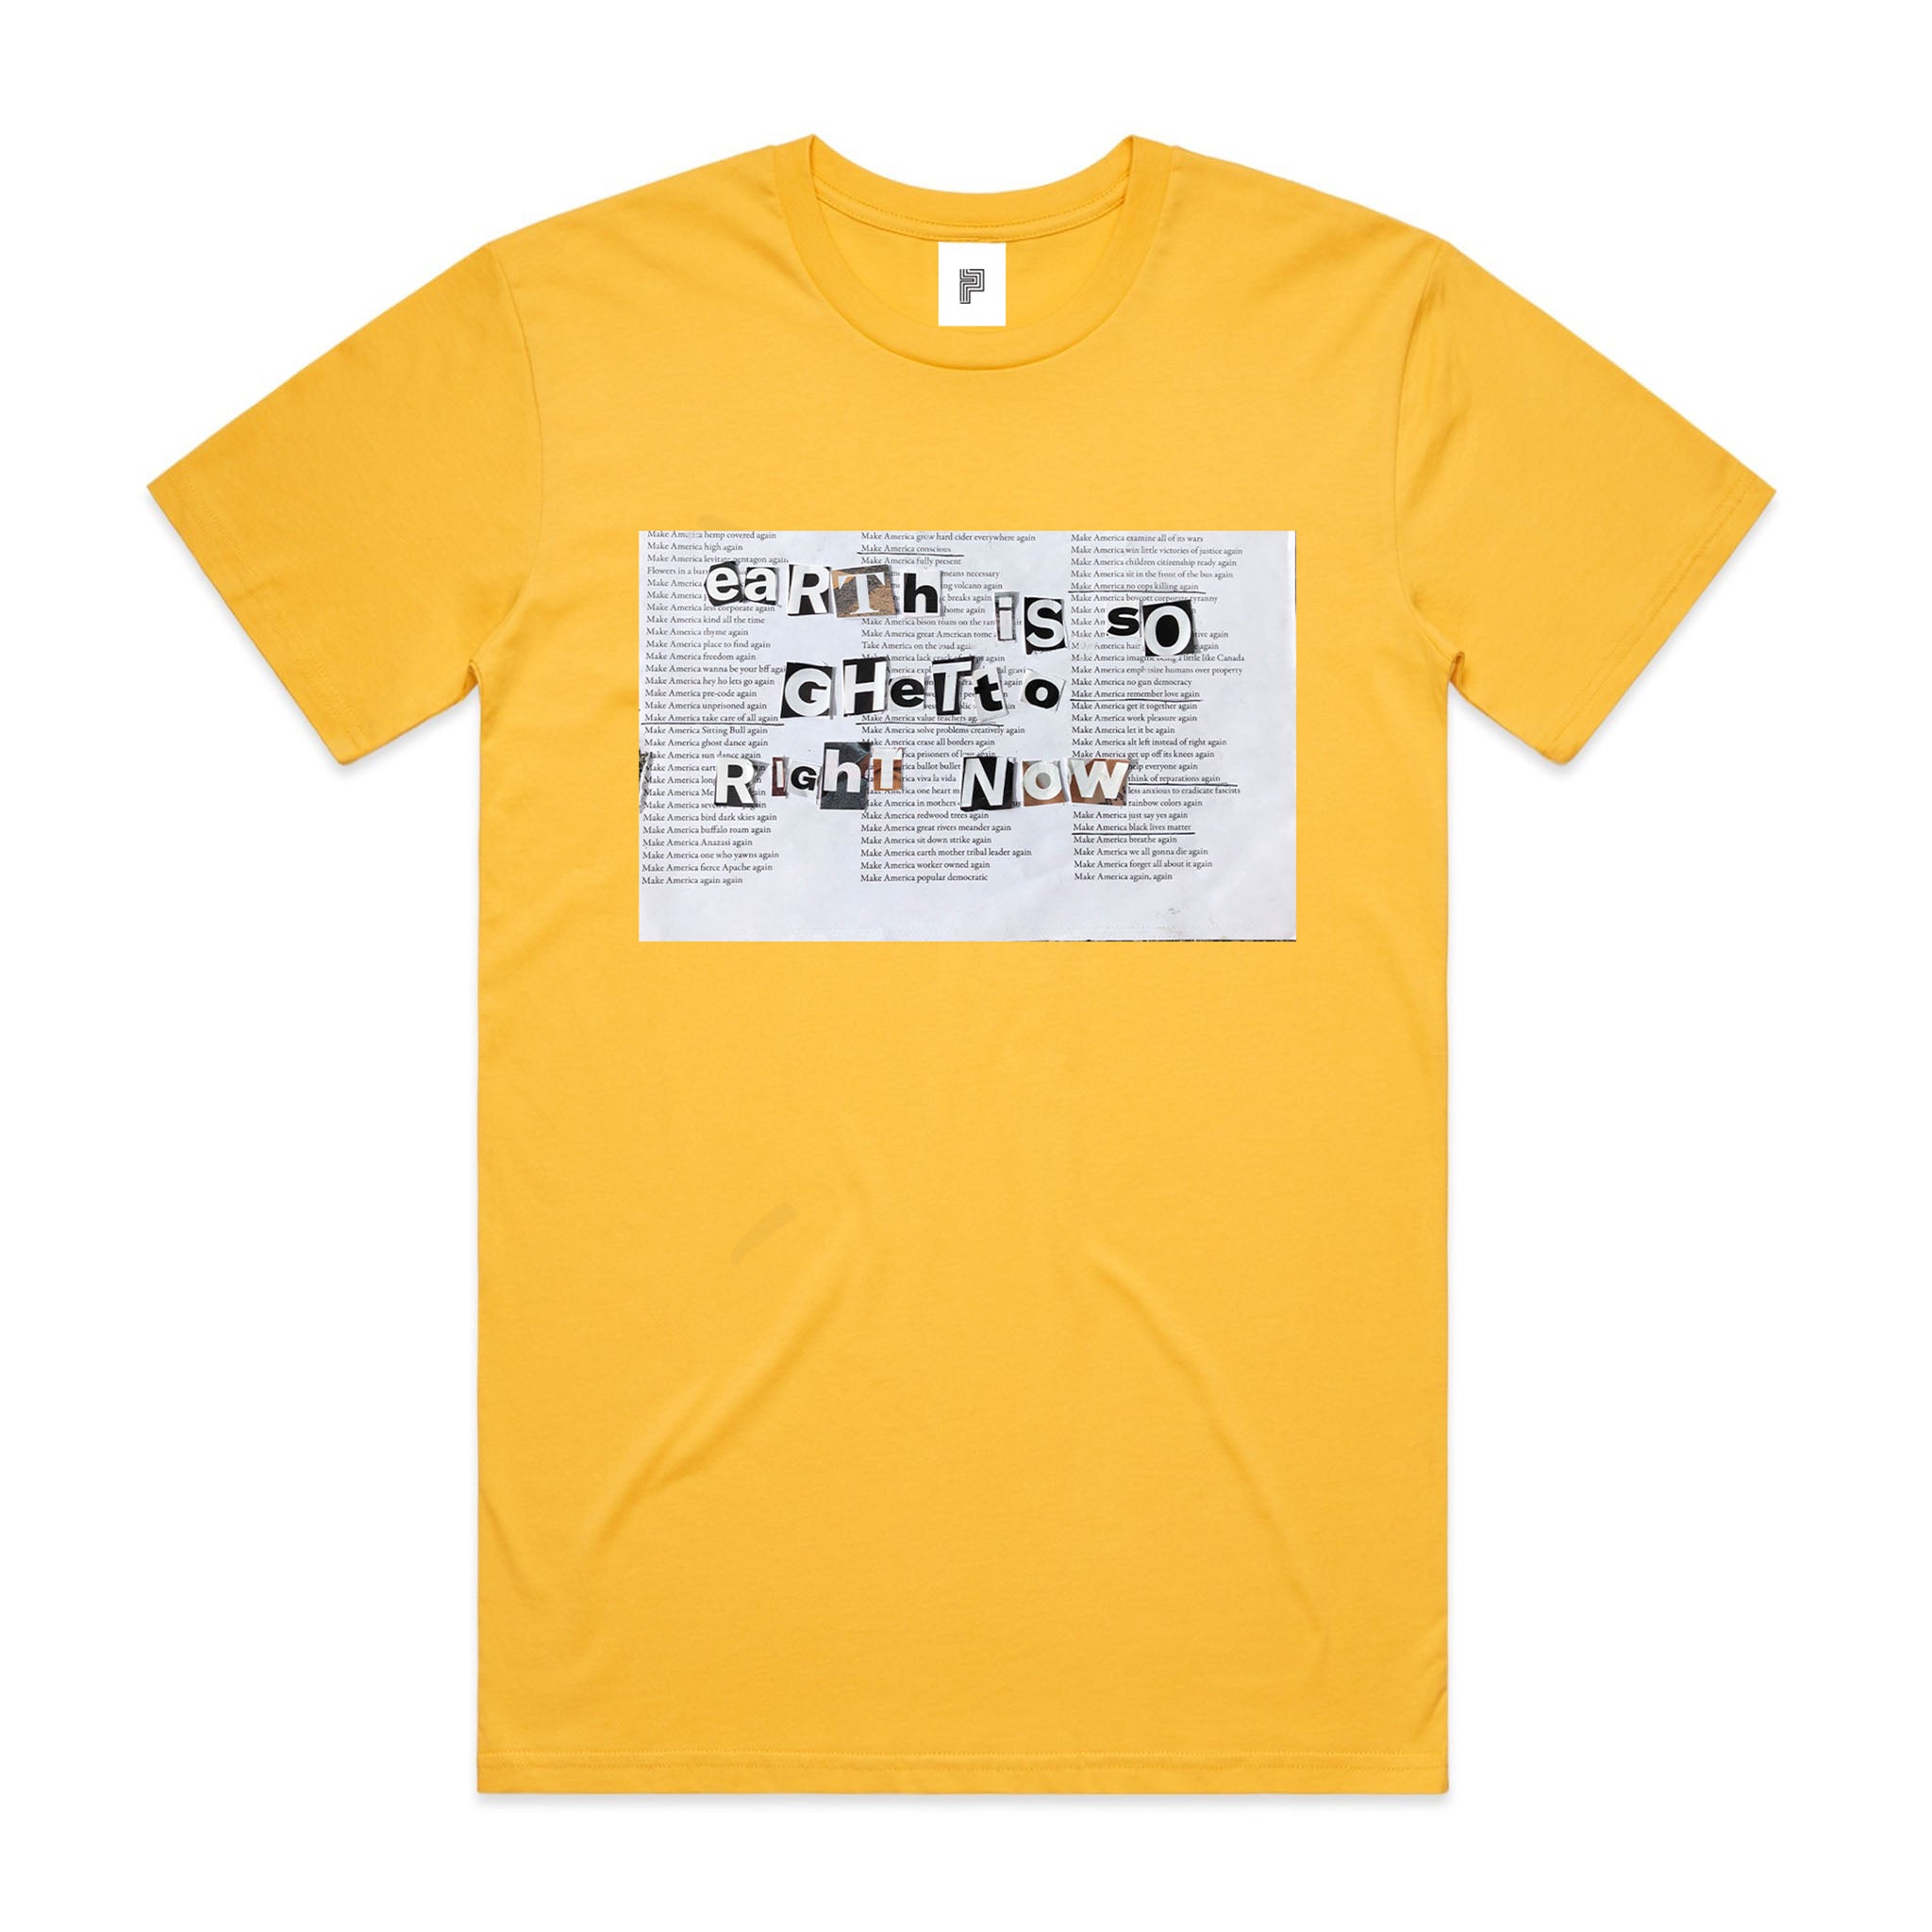 EARTH IS SO - BEATRICE DOMOND T-SHIRT [YELLOW]